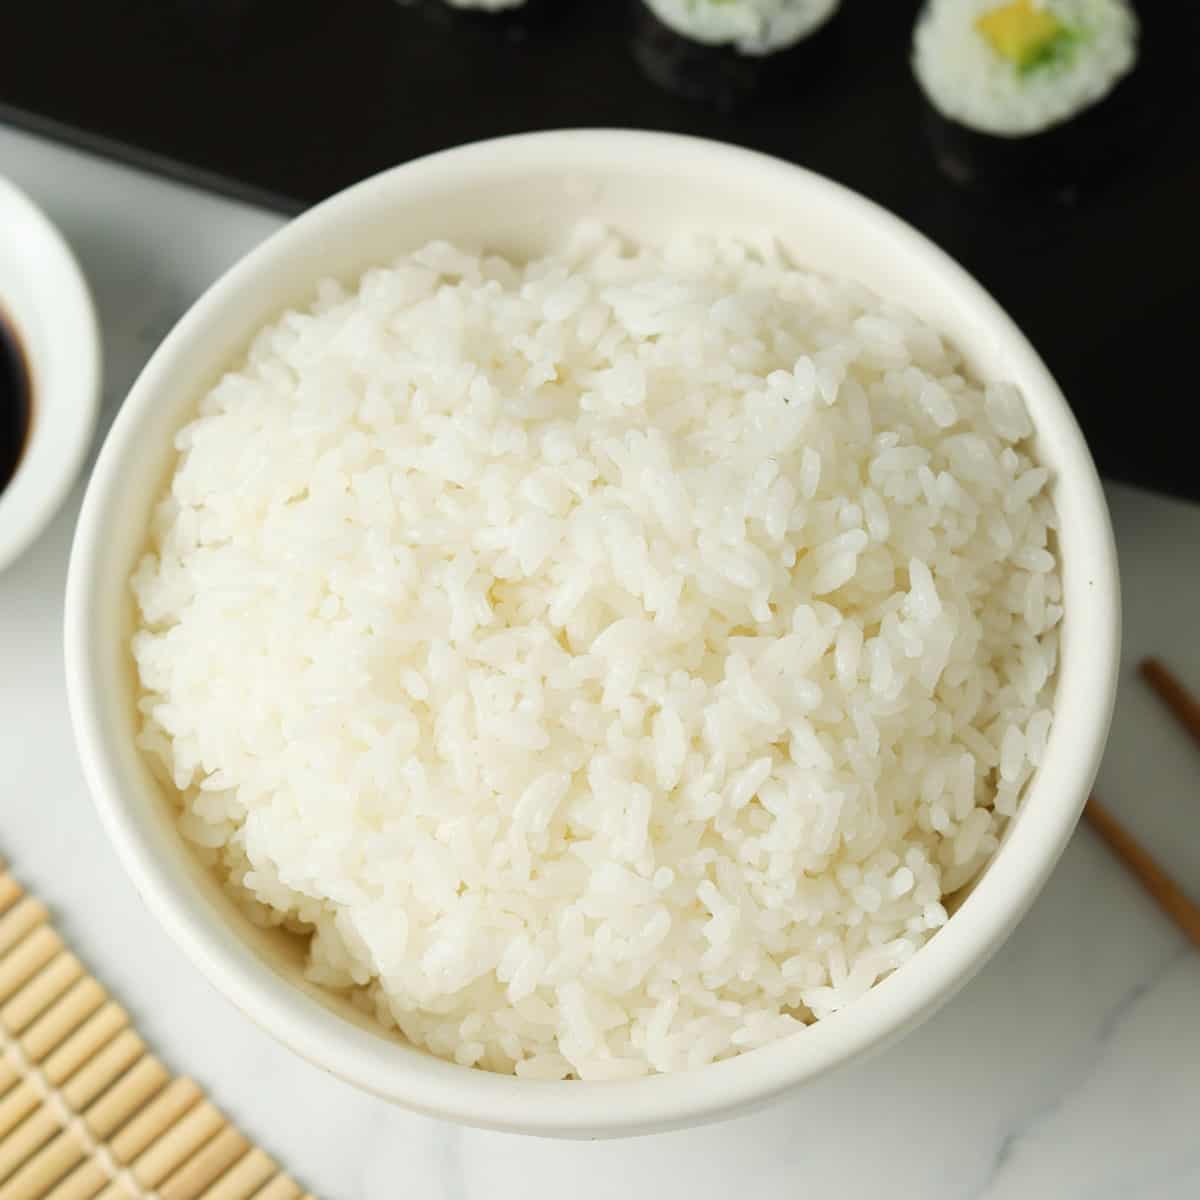 https://apeachyplate.com/wp-content/uploads/2022/07/rice-cooker-sushi-rice-square.jpg